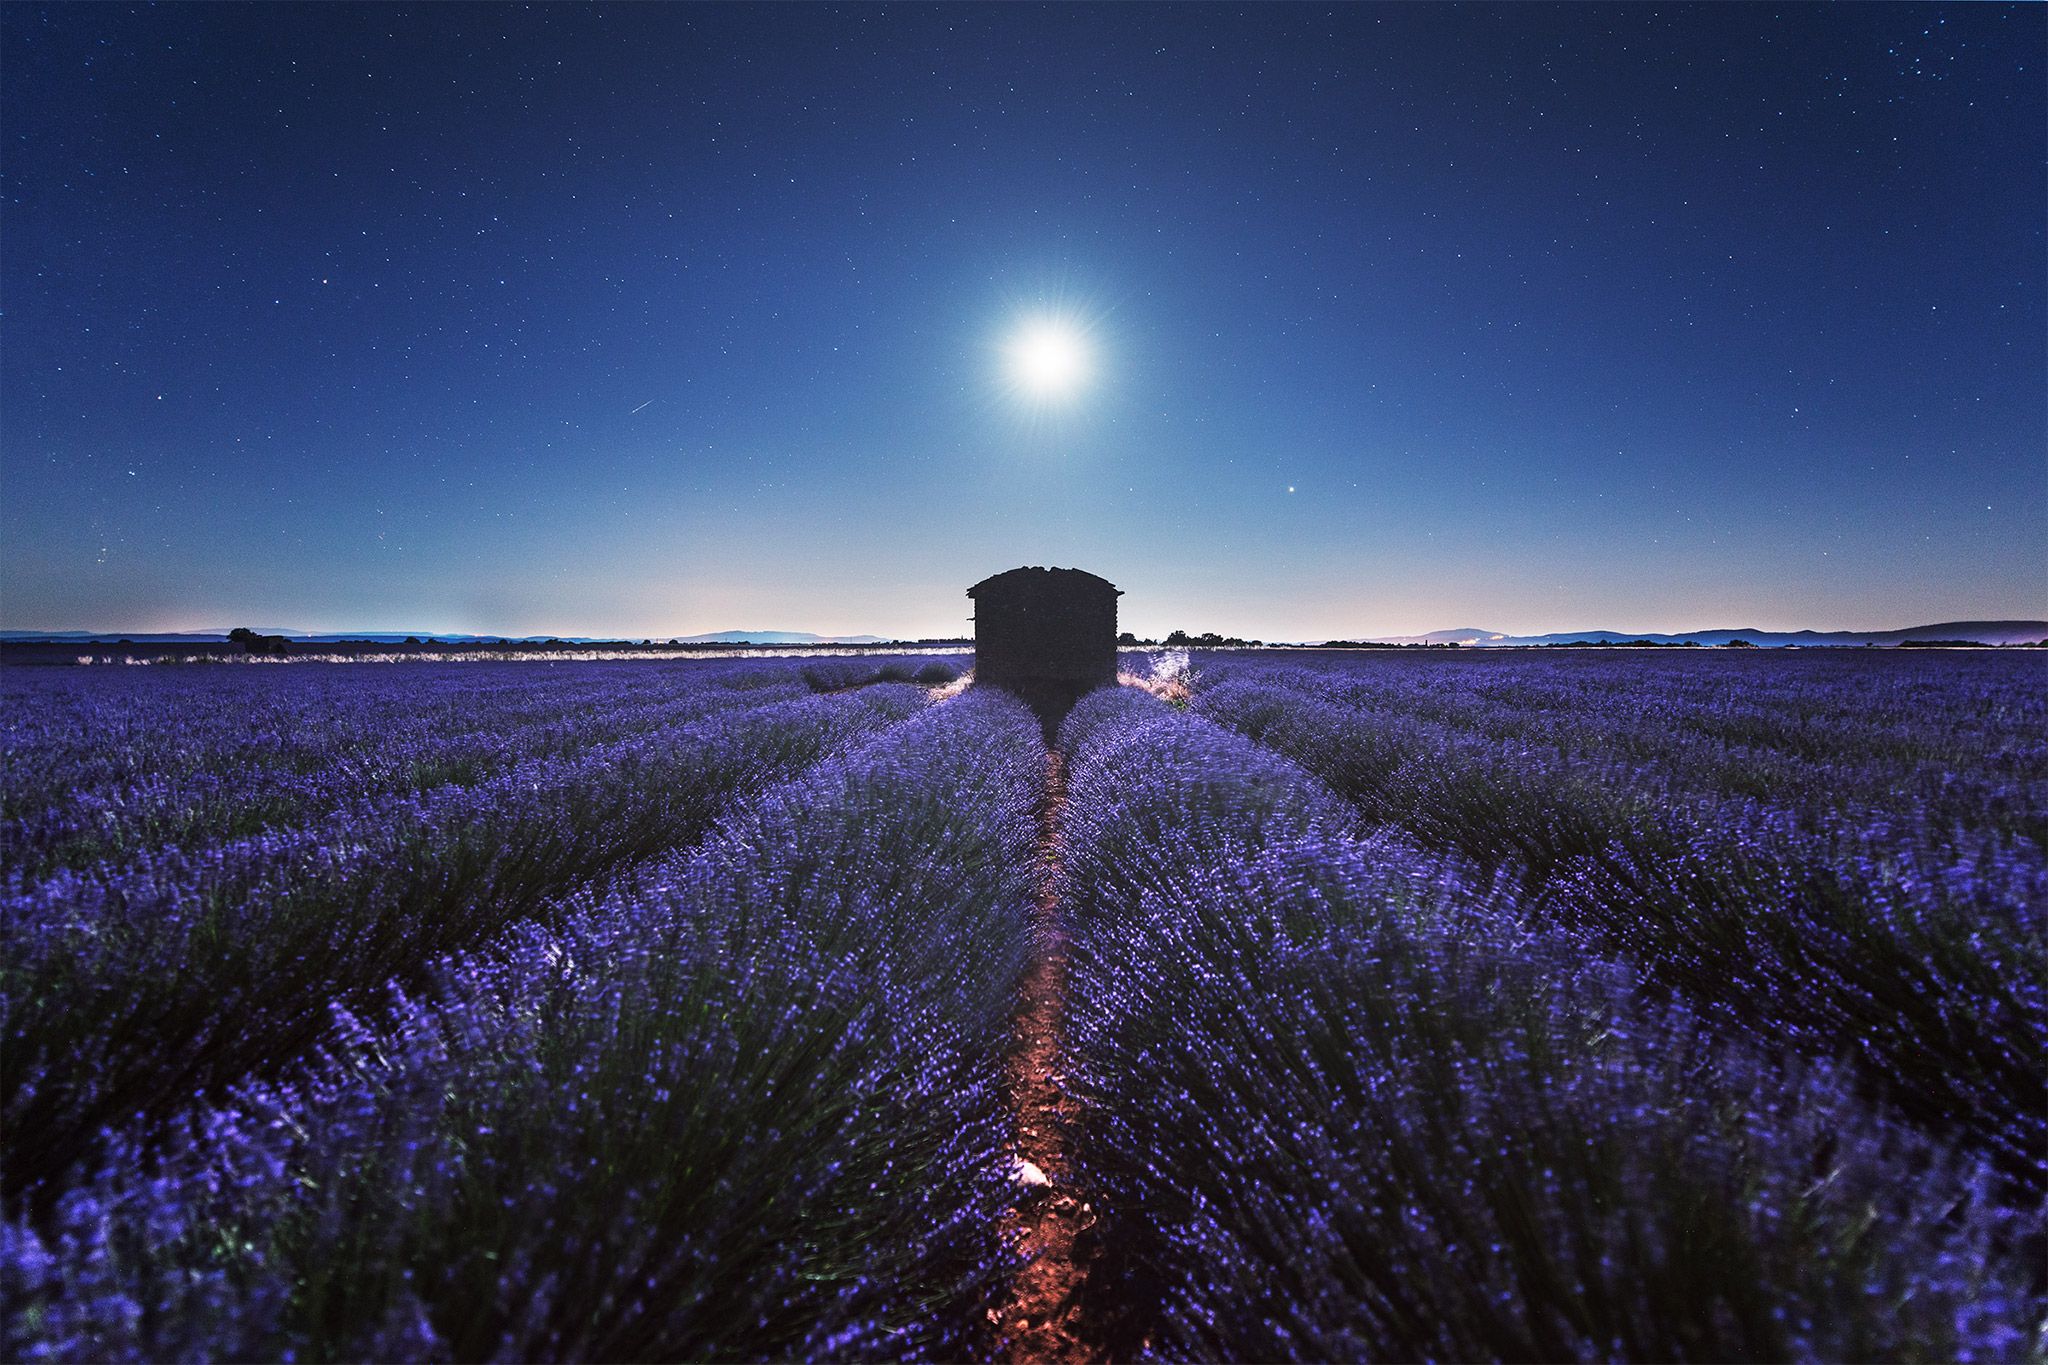 Ultimate Photography Guide to the Lavender Fields of Prov